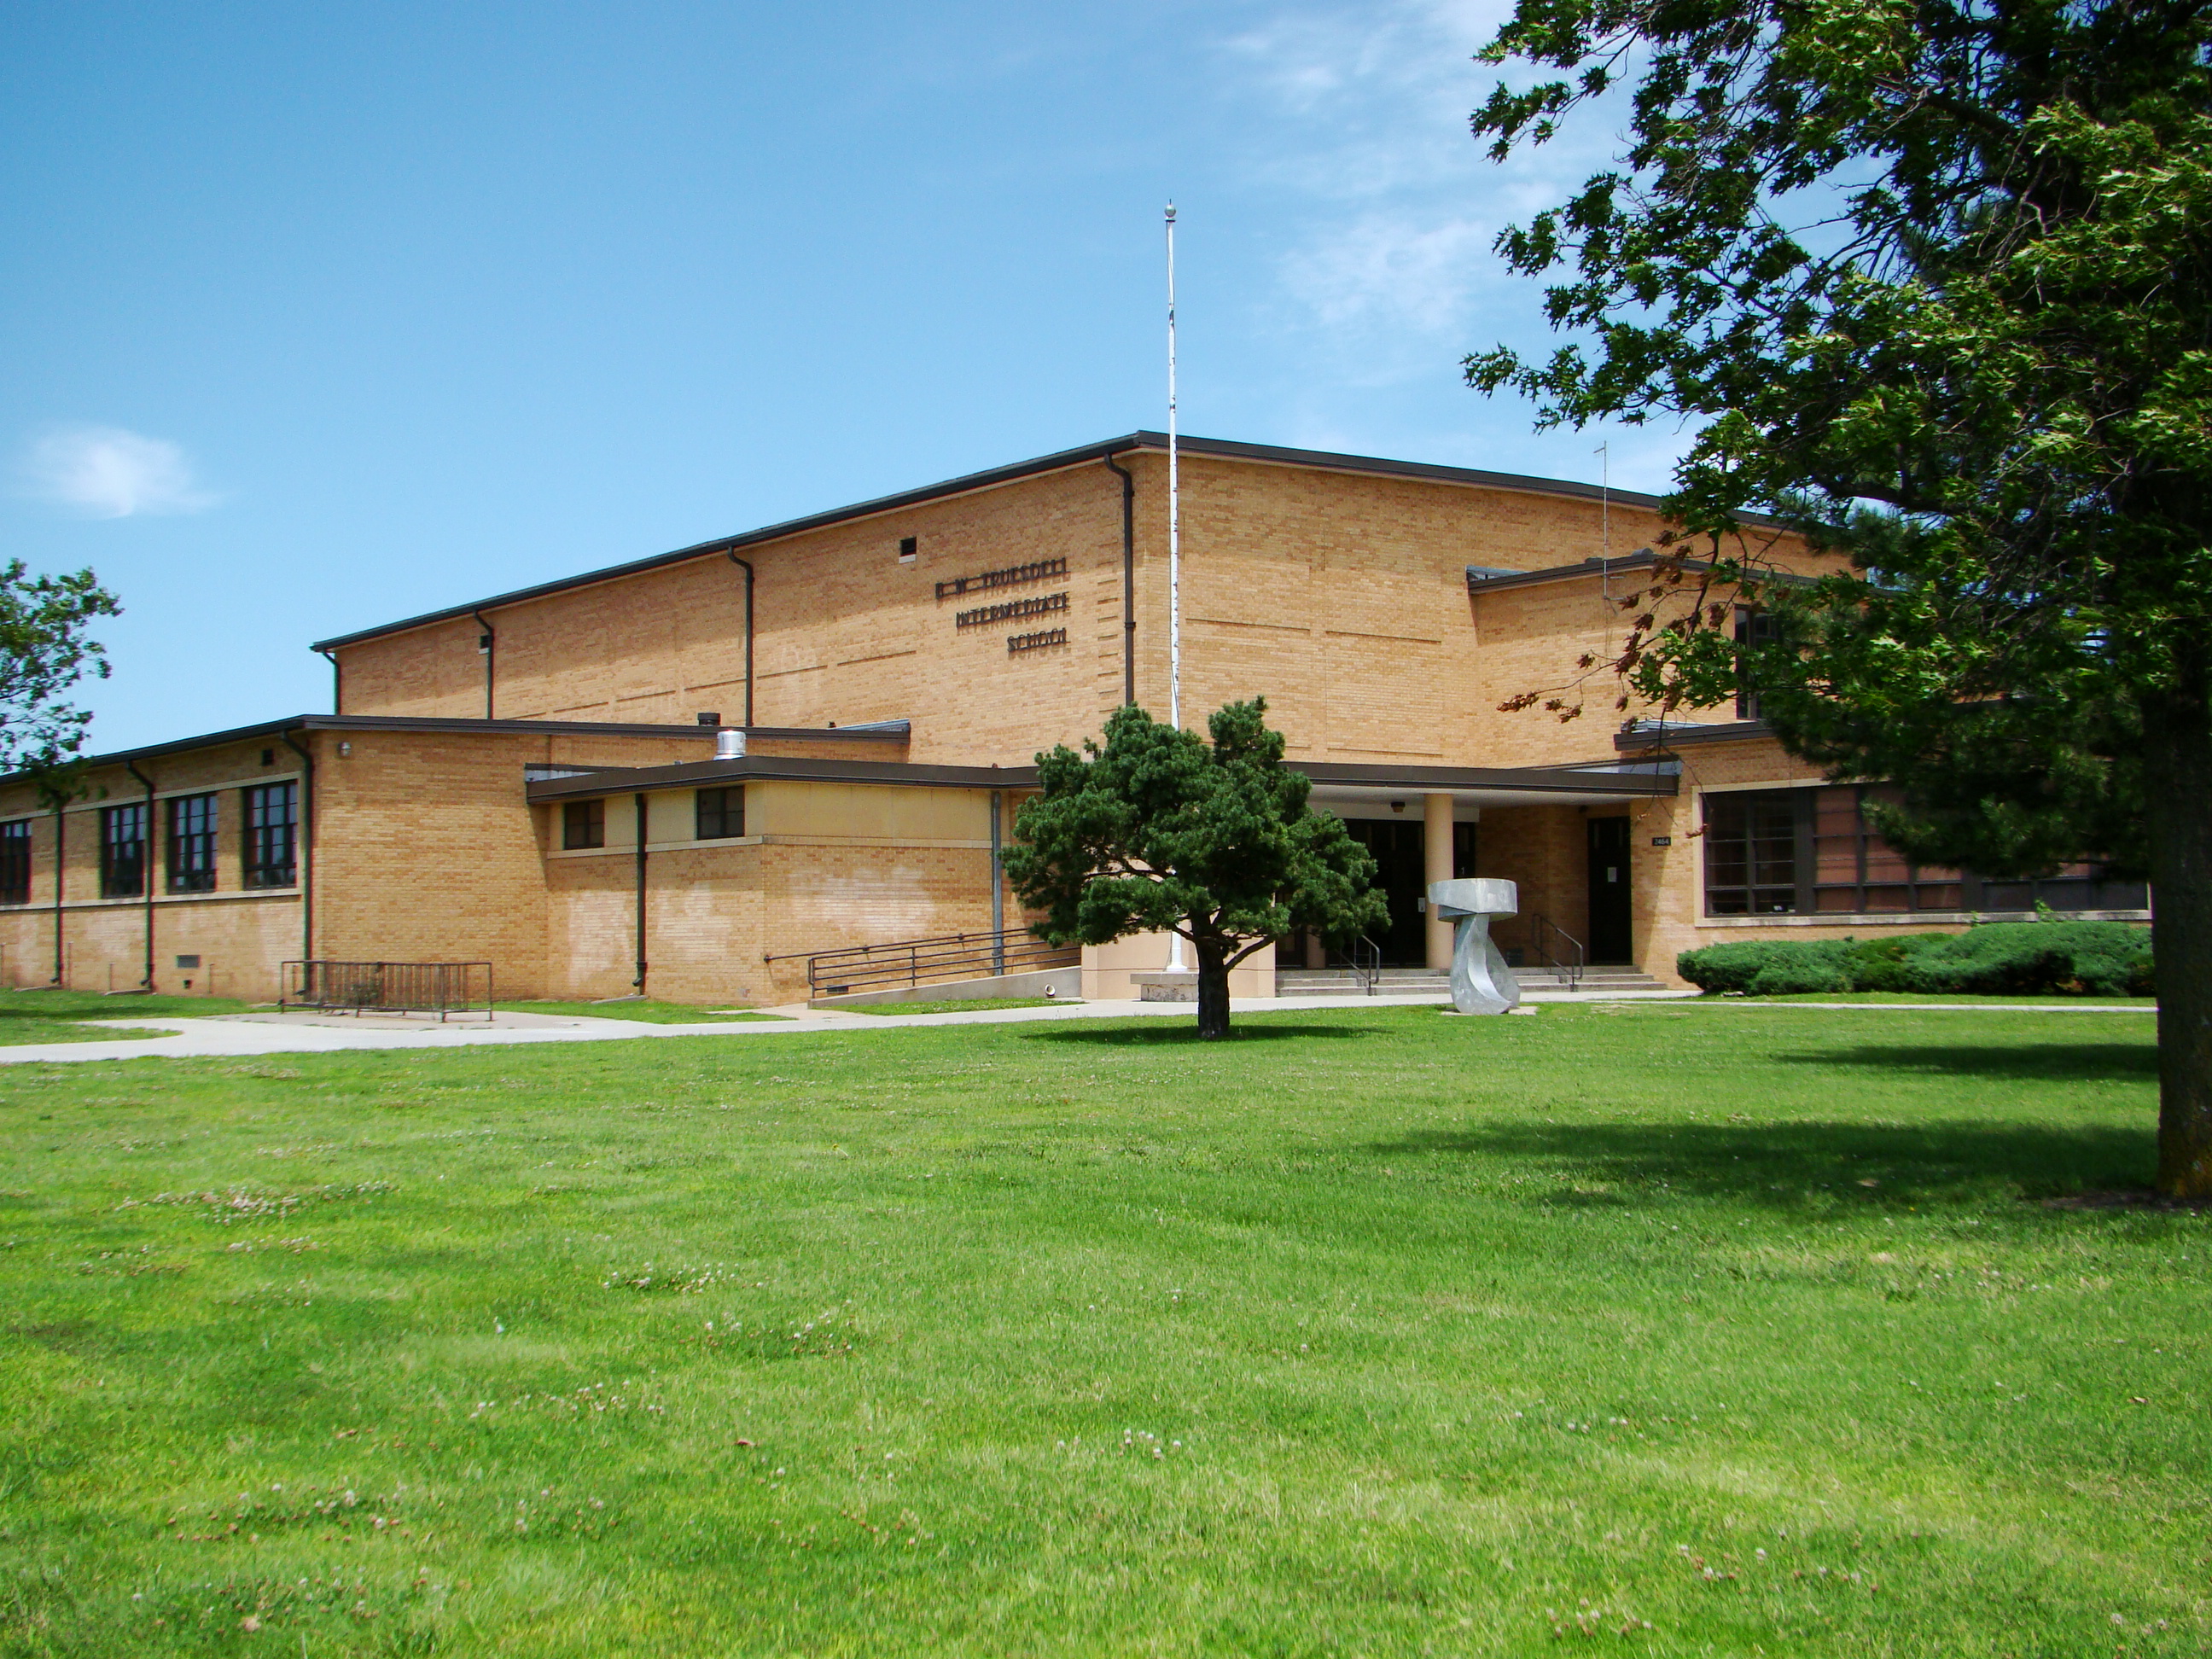 Image of the front of Truesdell Middle School